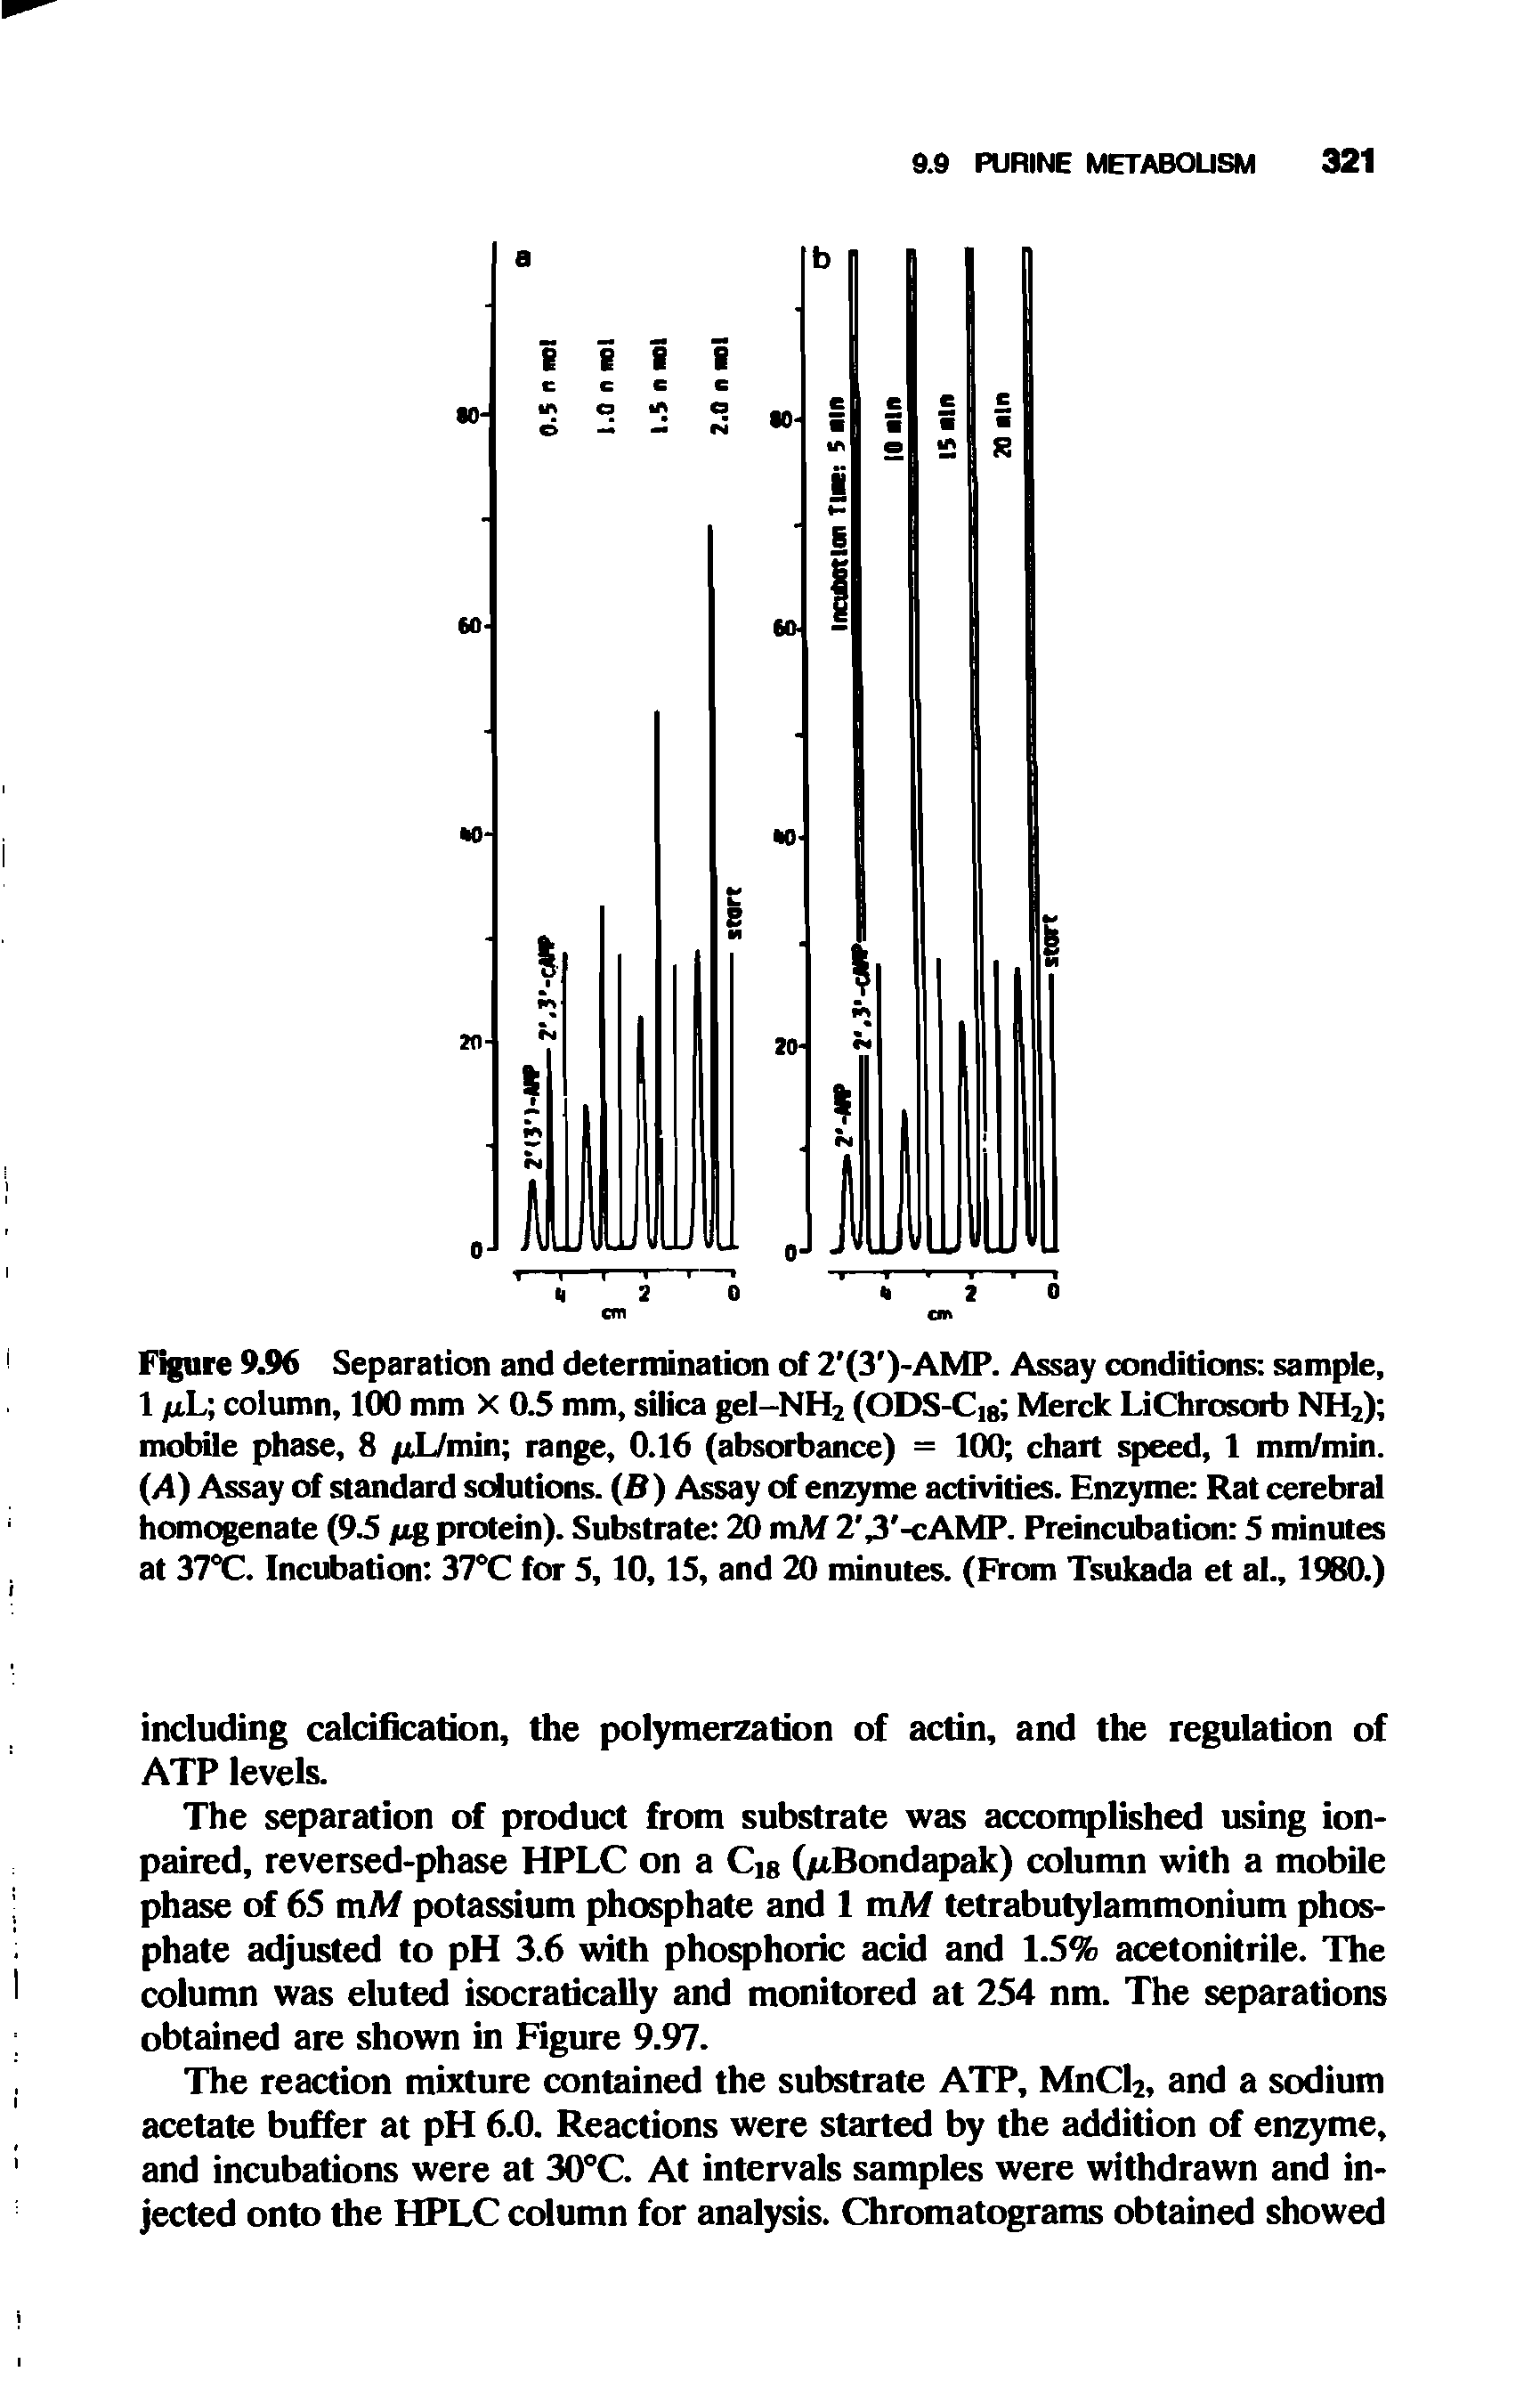 Figure 9.96 Separation and determination of 2 (3 )-AMP. Assay conditions sample, 1 /xL column, 100 mm X 0.5 mm, silica gel-NH2 (ODS-C 8 Merck LiChrosorb NH2) mobile phase, 8 /xL/min range, 0.16 (absorbance) = 100 chart speed, 1 mm/min. (A) Assay of standard solutions. (B) Assay of enzyme activities. Enzyme Rat cerebral homogenate (9.5 yxg protein). Substrate 20 mM 2, 3 -cAMP. Preincubation 5 minutes at 37°C. Incubation 37°C for 5,10,15, and 20 minutes. (From Tsukada et al., 1980.)...